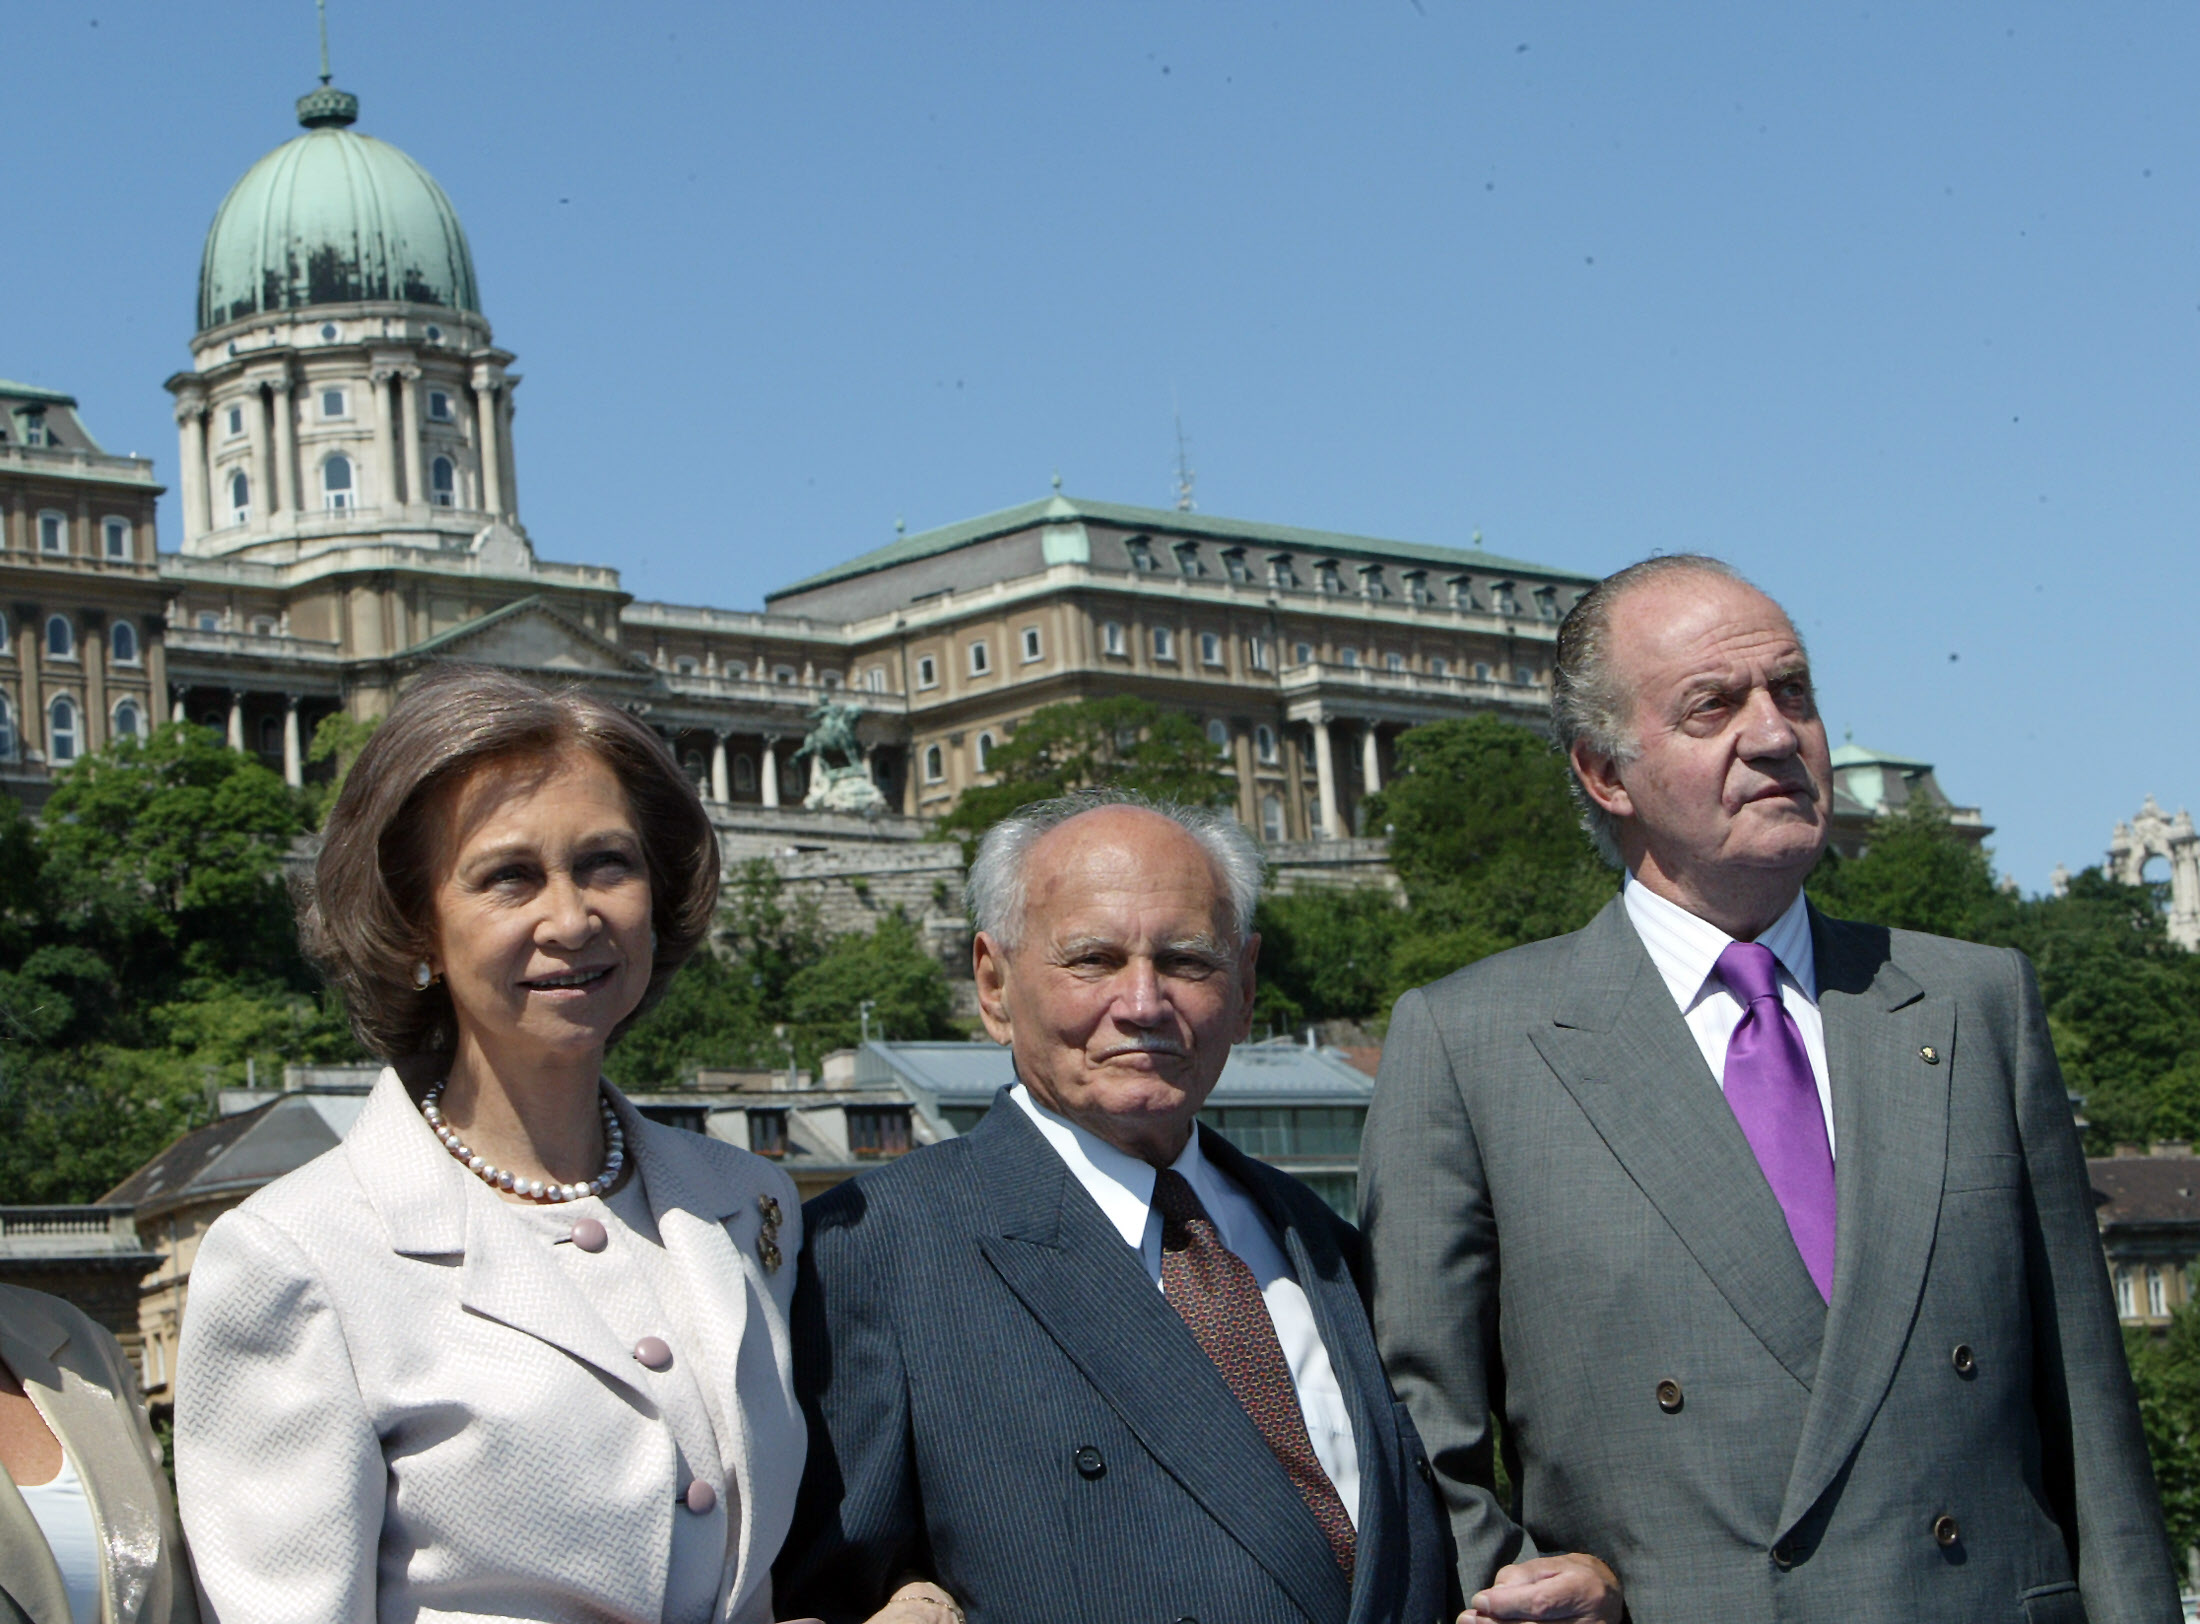 Spanish Queen Sofia (L), former Hungarian President Arpad Goencz (C) and Spanish King Juan Carlos (R) pose 30 May 2007 on the Budapest ship during a ride on the Danube river. The Spanish royal couple started 29 May 2007 a three-day official visit to Hungary. AFP PHOTO / ATTILA KISBENEDEK